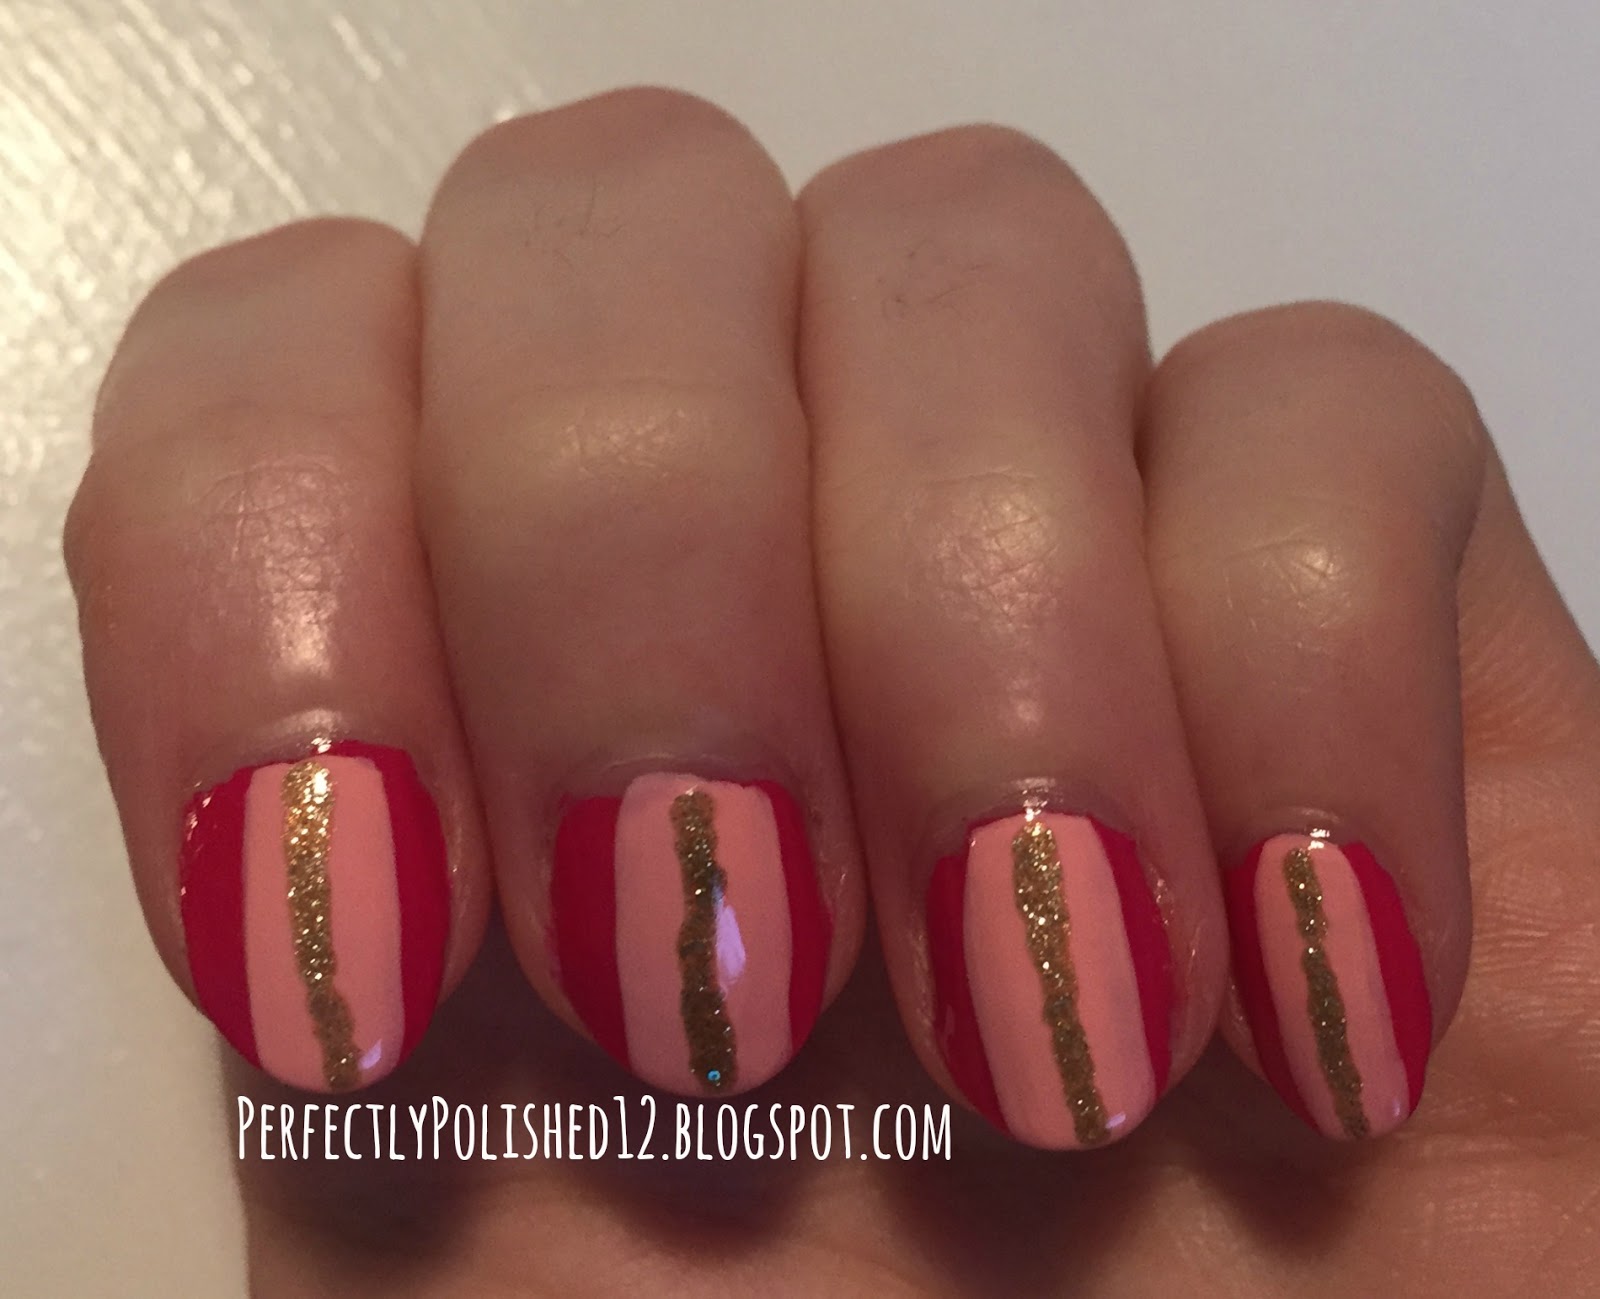 October Nail Art with Christian Motifs - wide 10